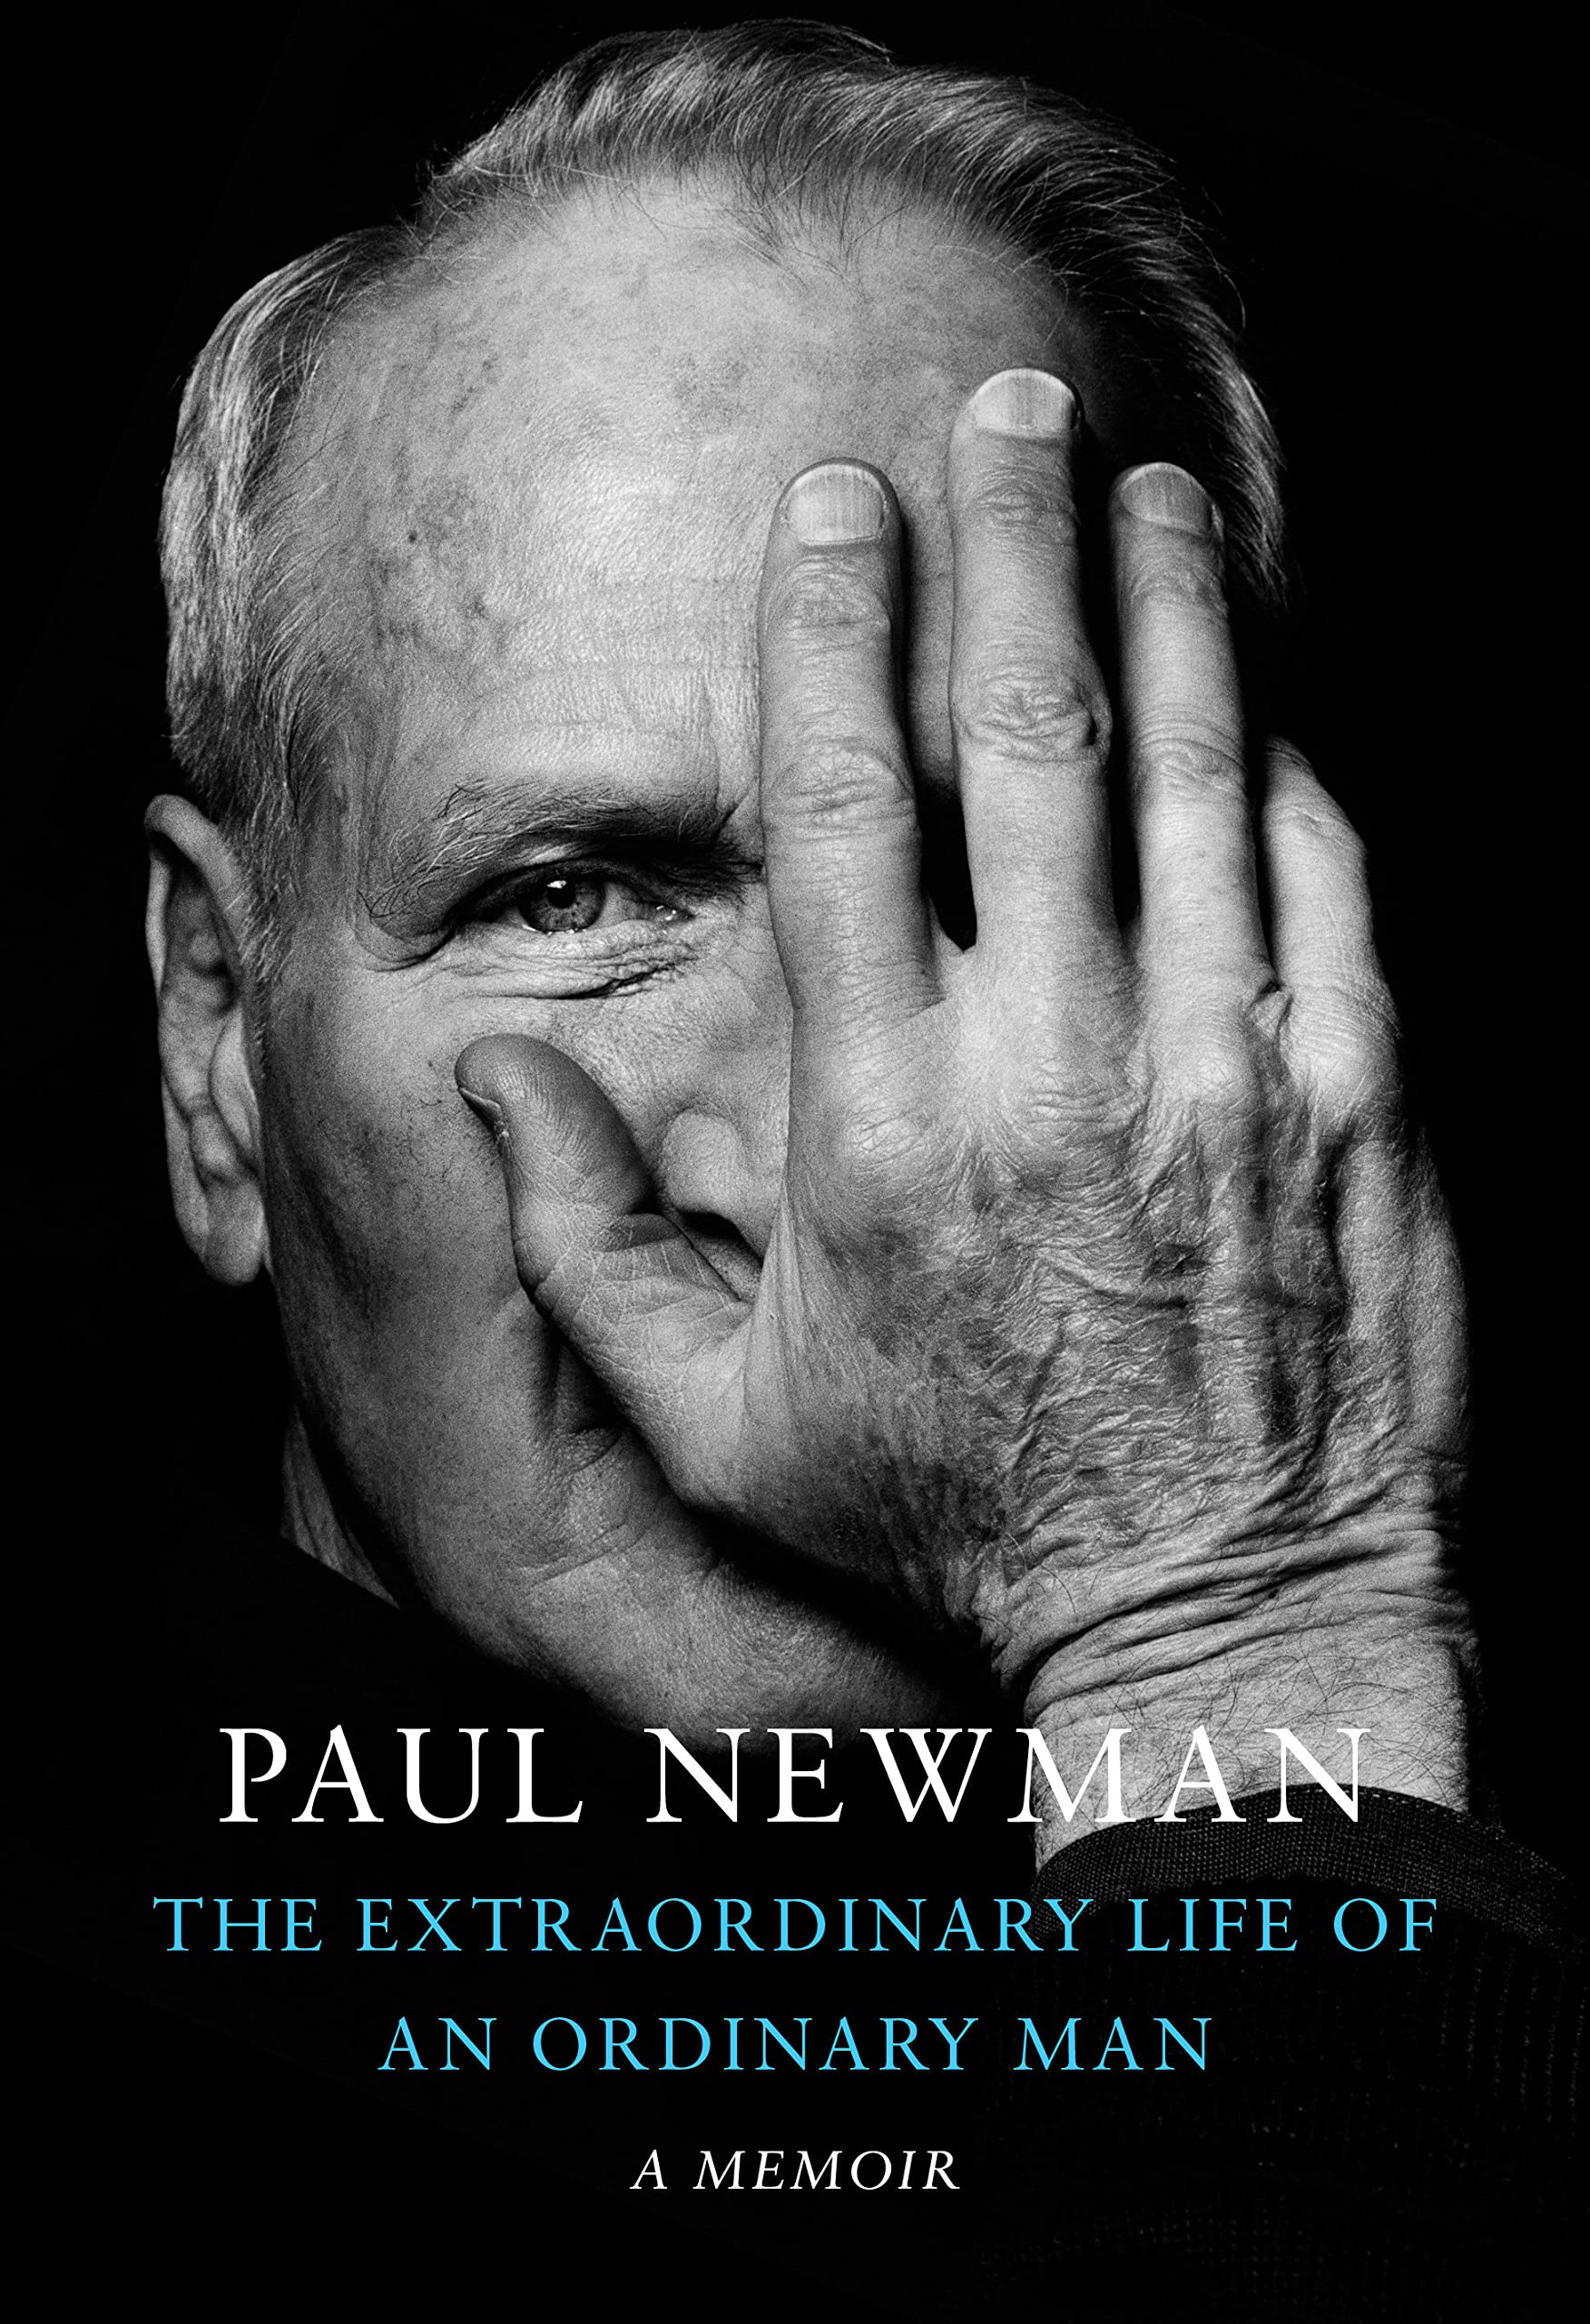 Book jacket for "The Extraordinary Life of an Ordinary Man" by Paul Newman